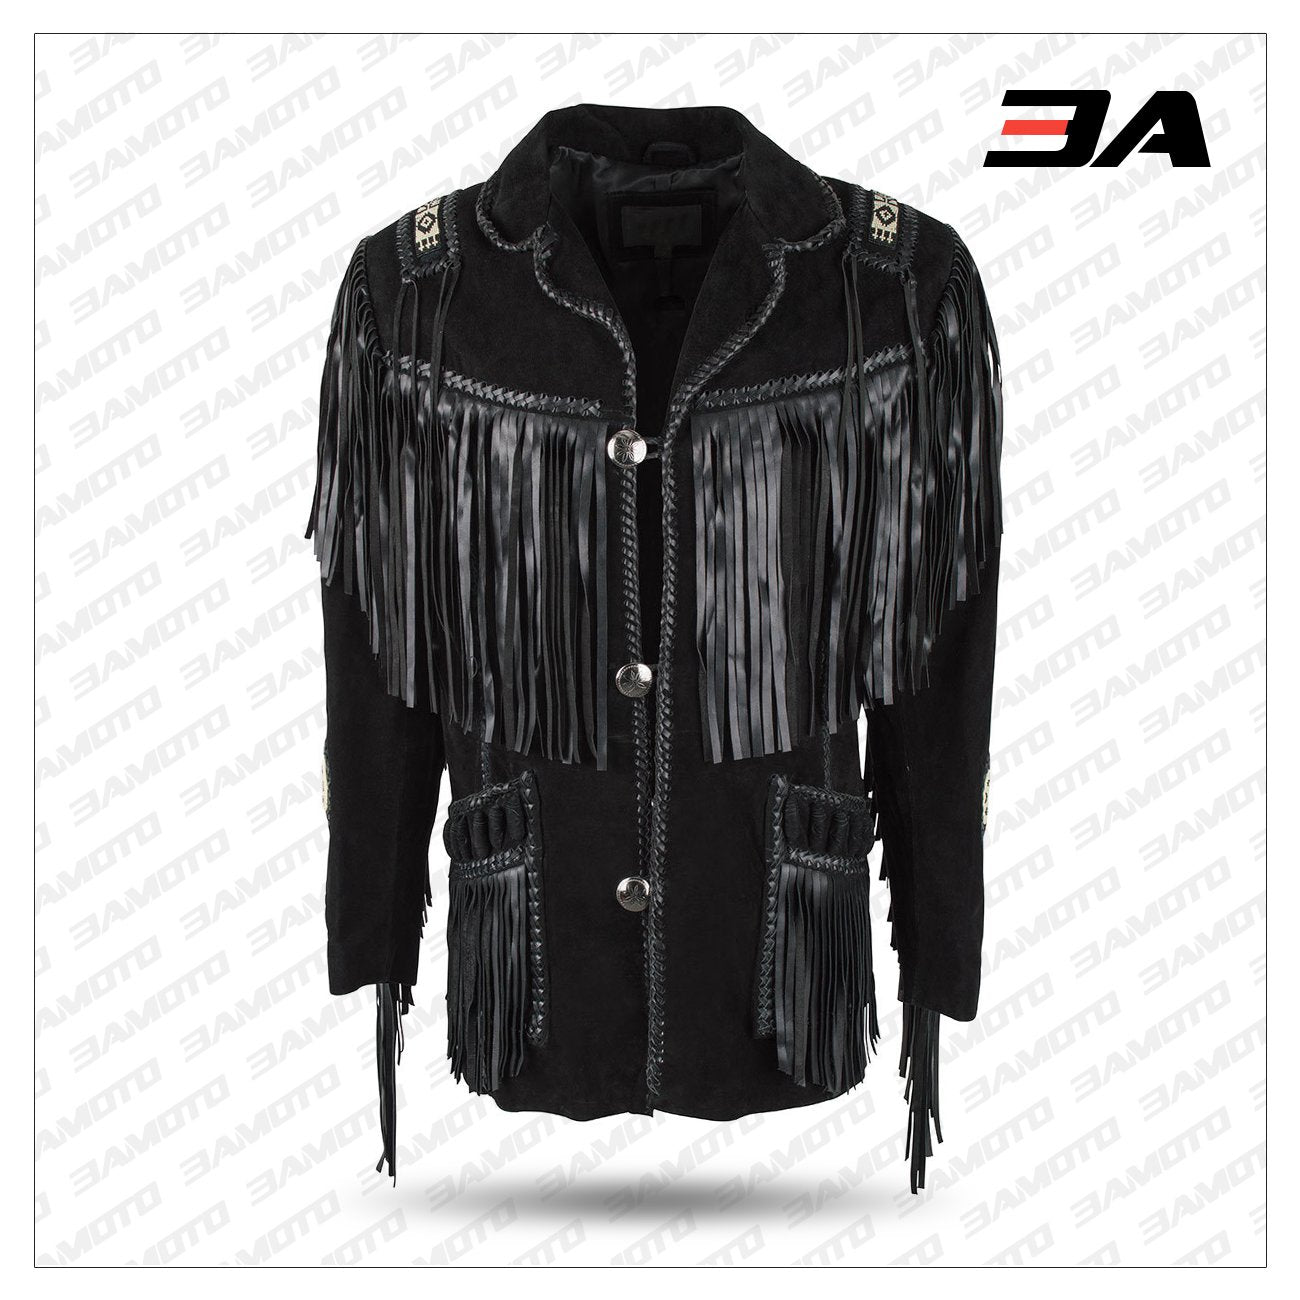 Black Boar Suede Hand-Laced Bead Fringed Jacket with Trim